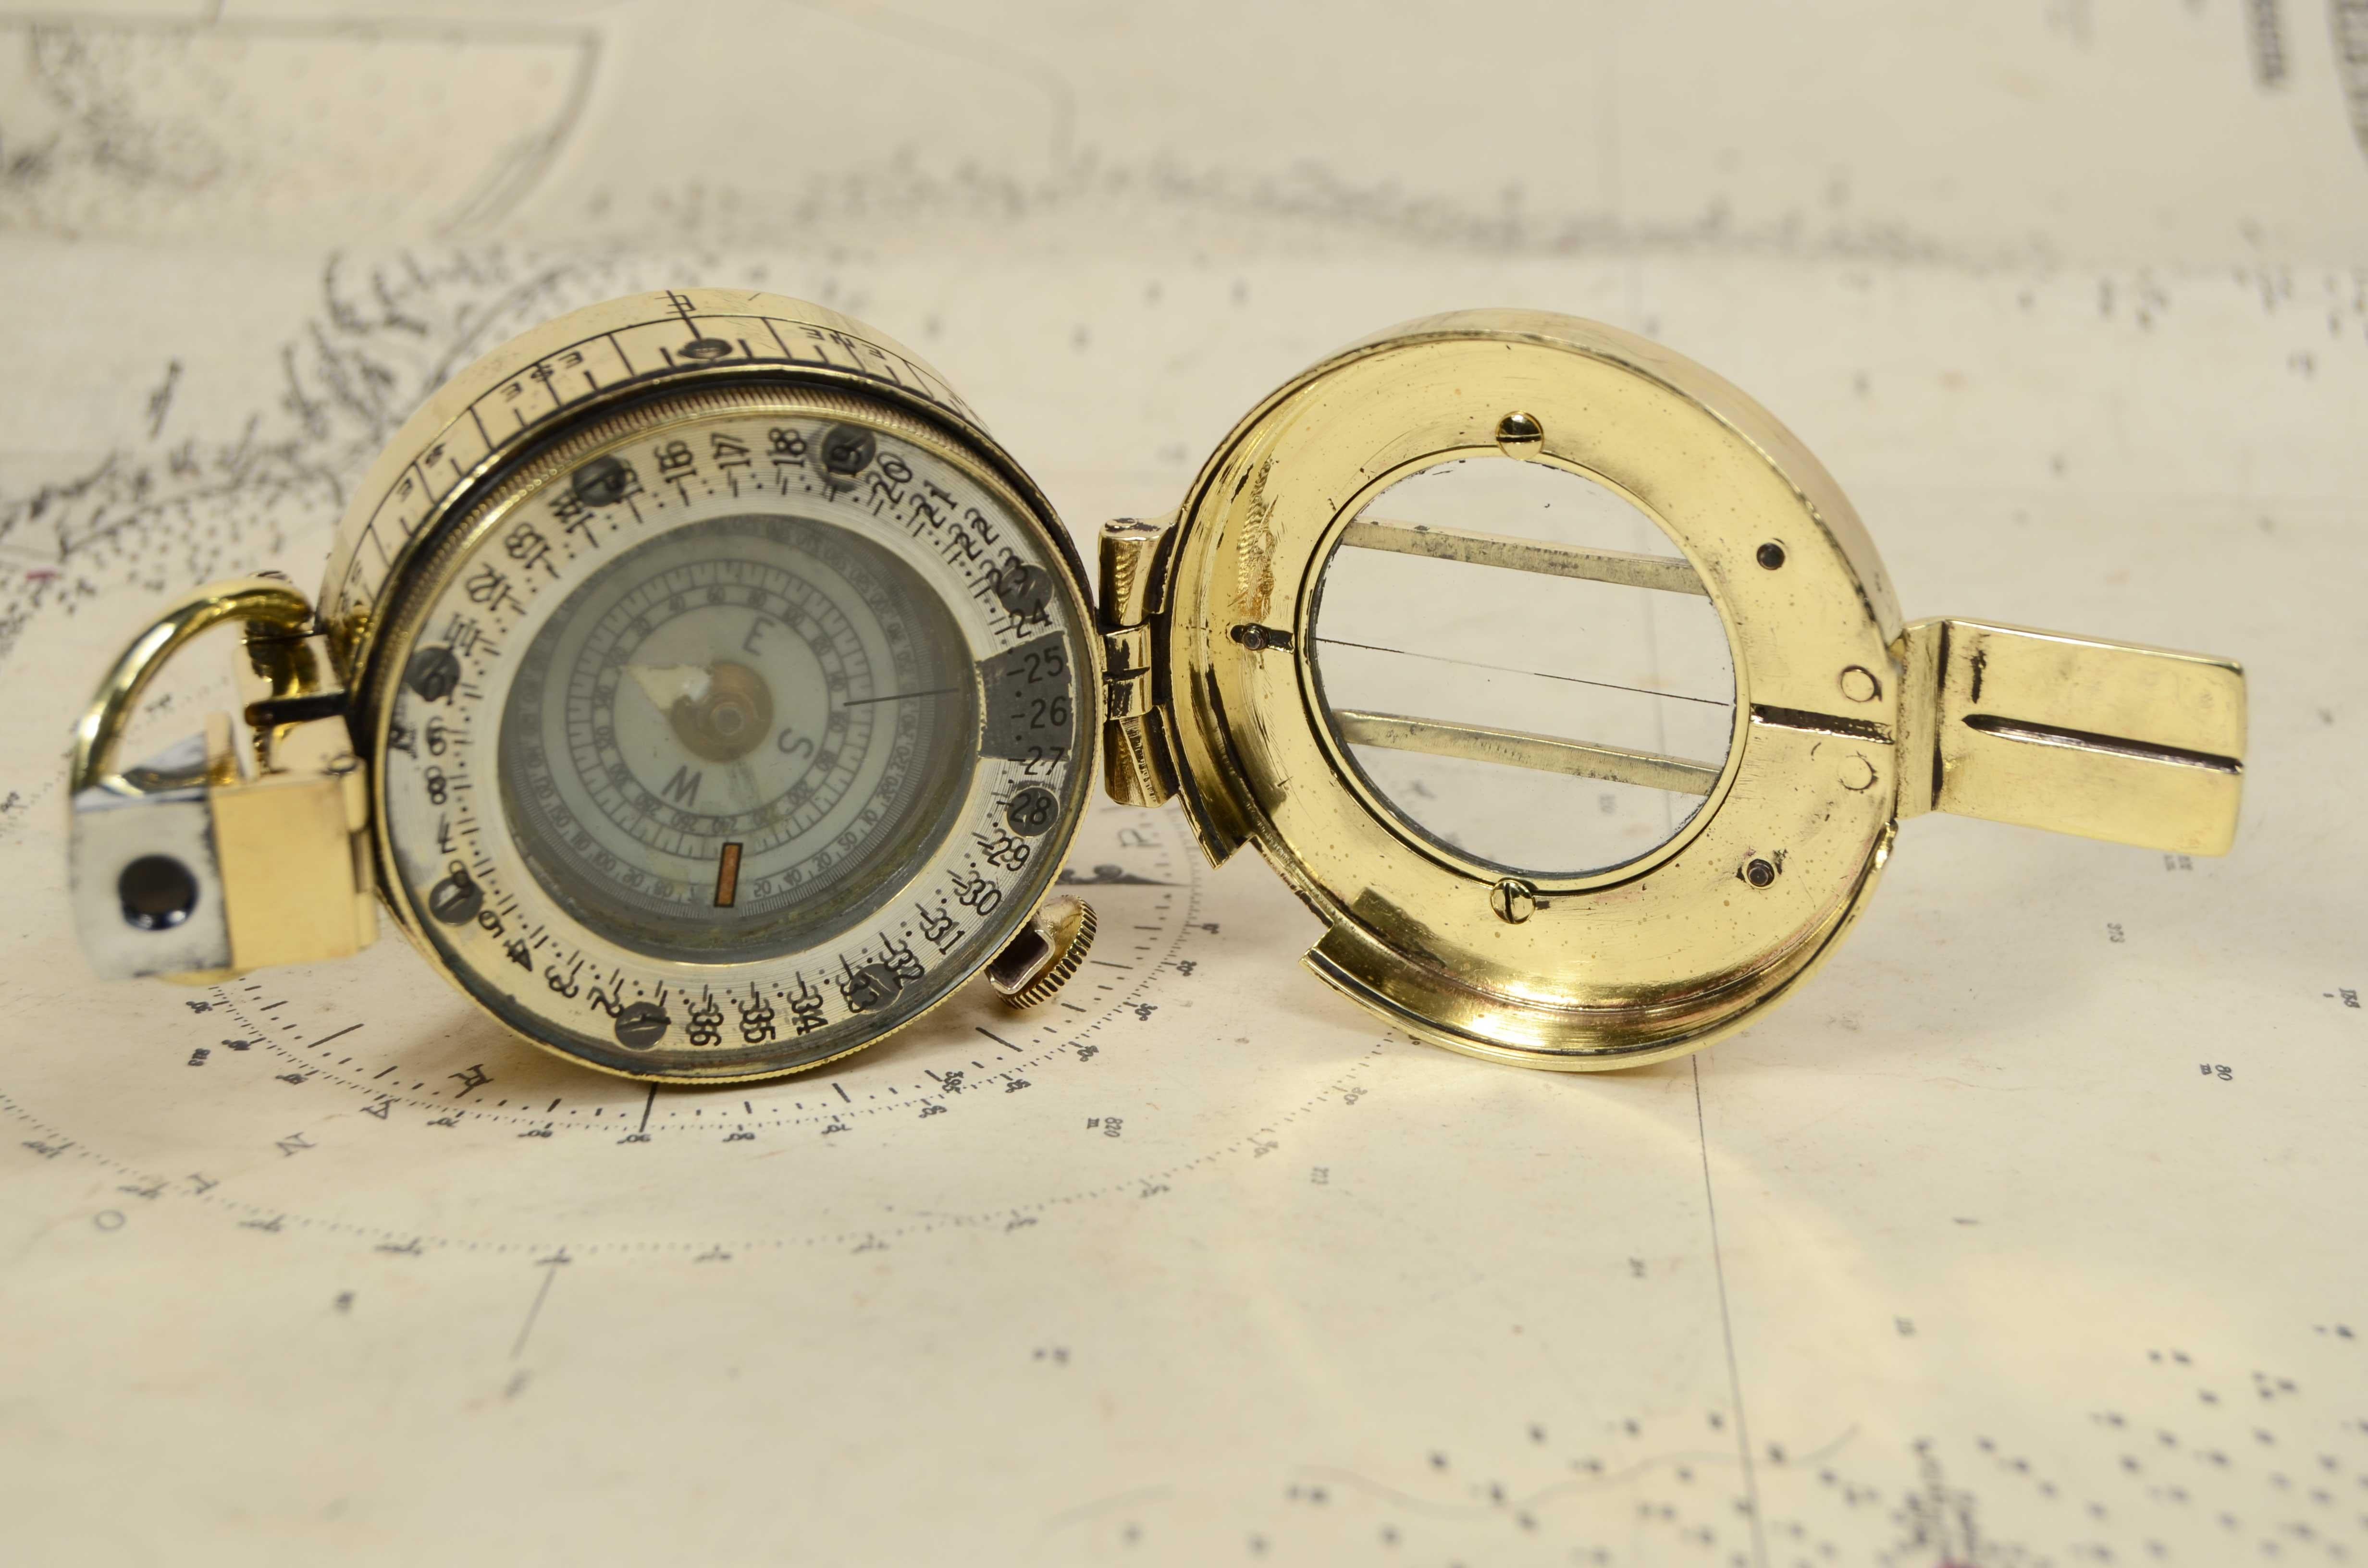 Brass Prismatic compass  by detection signed T.G. Co Ltd London no. B 21681 1940 MK For Sale